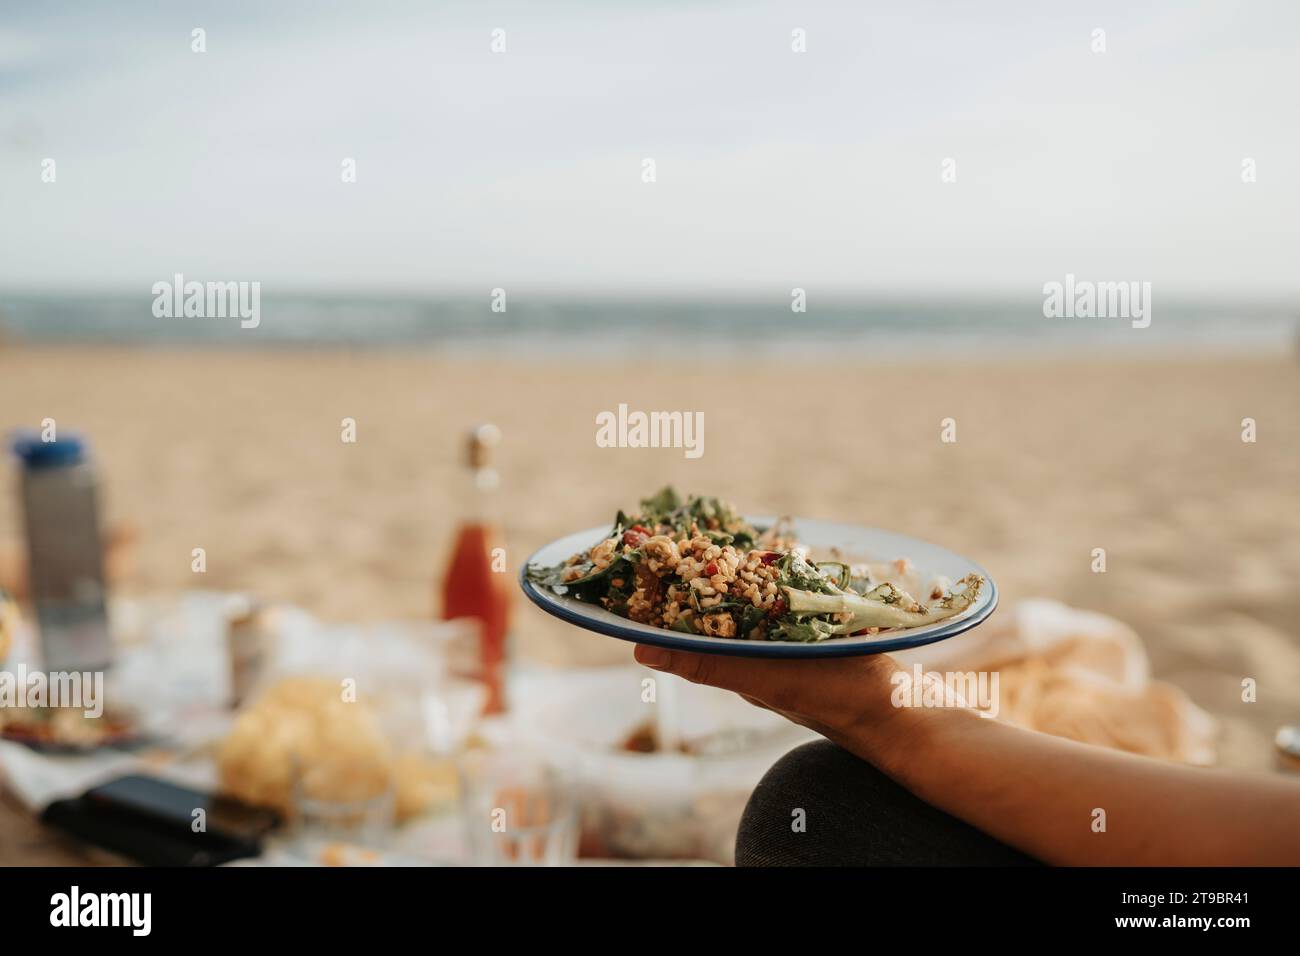 Person holding plate with meal on beach Stock Photo